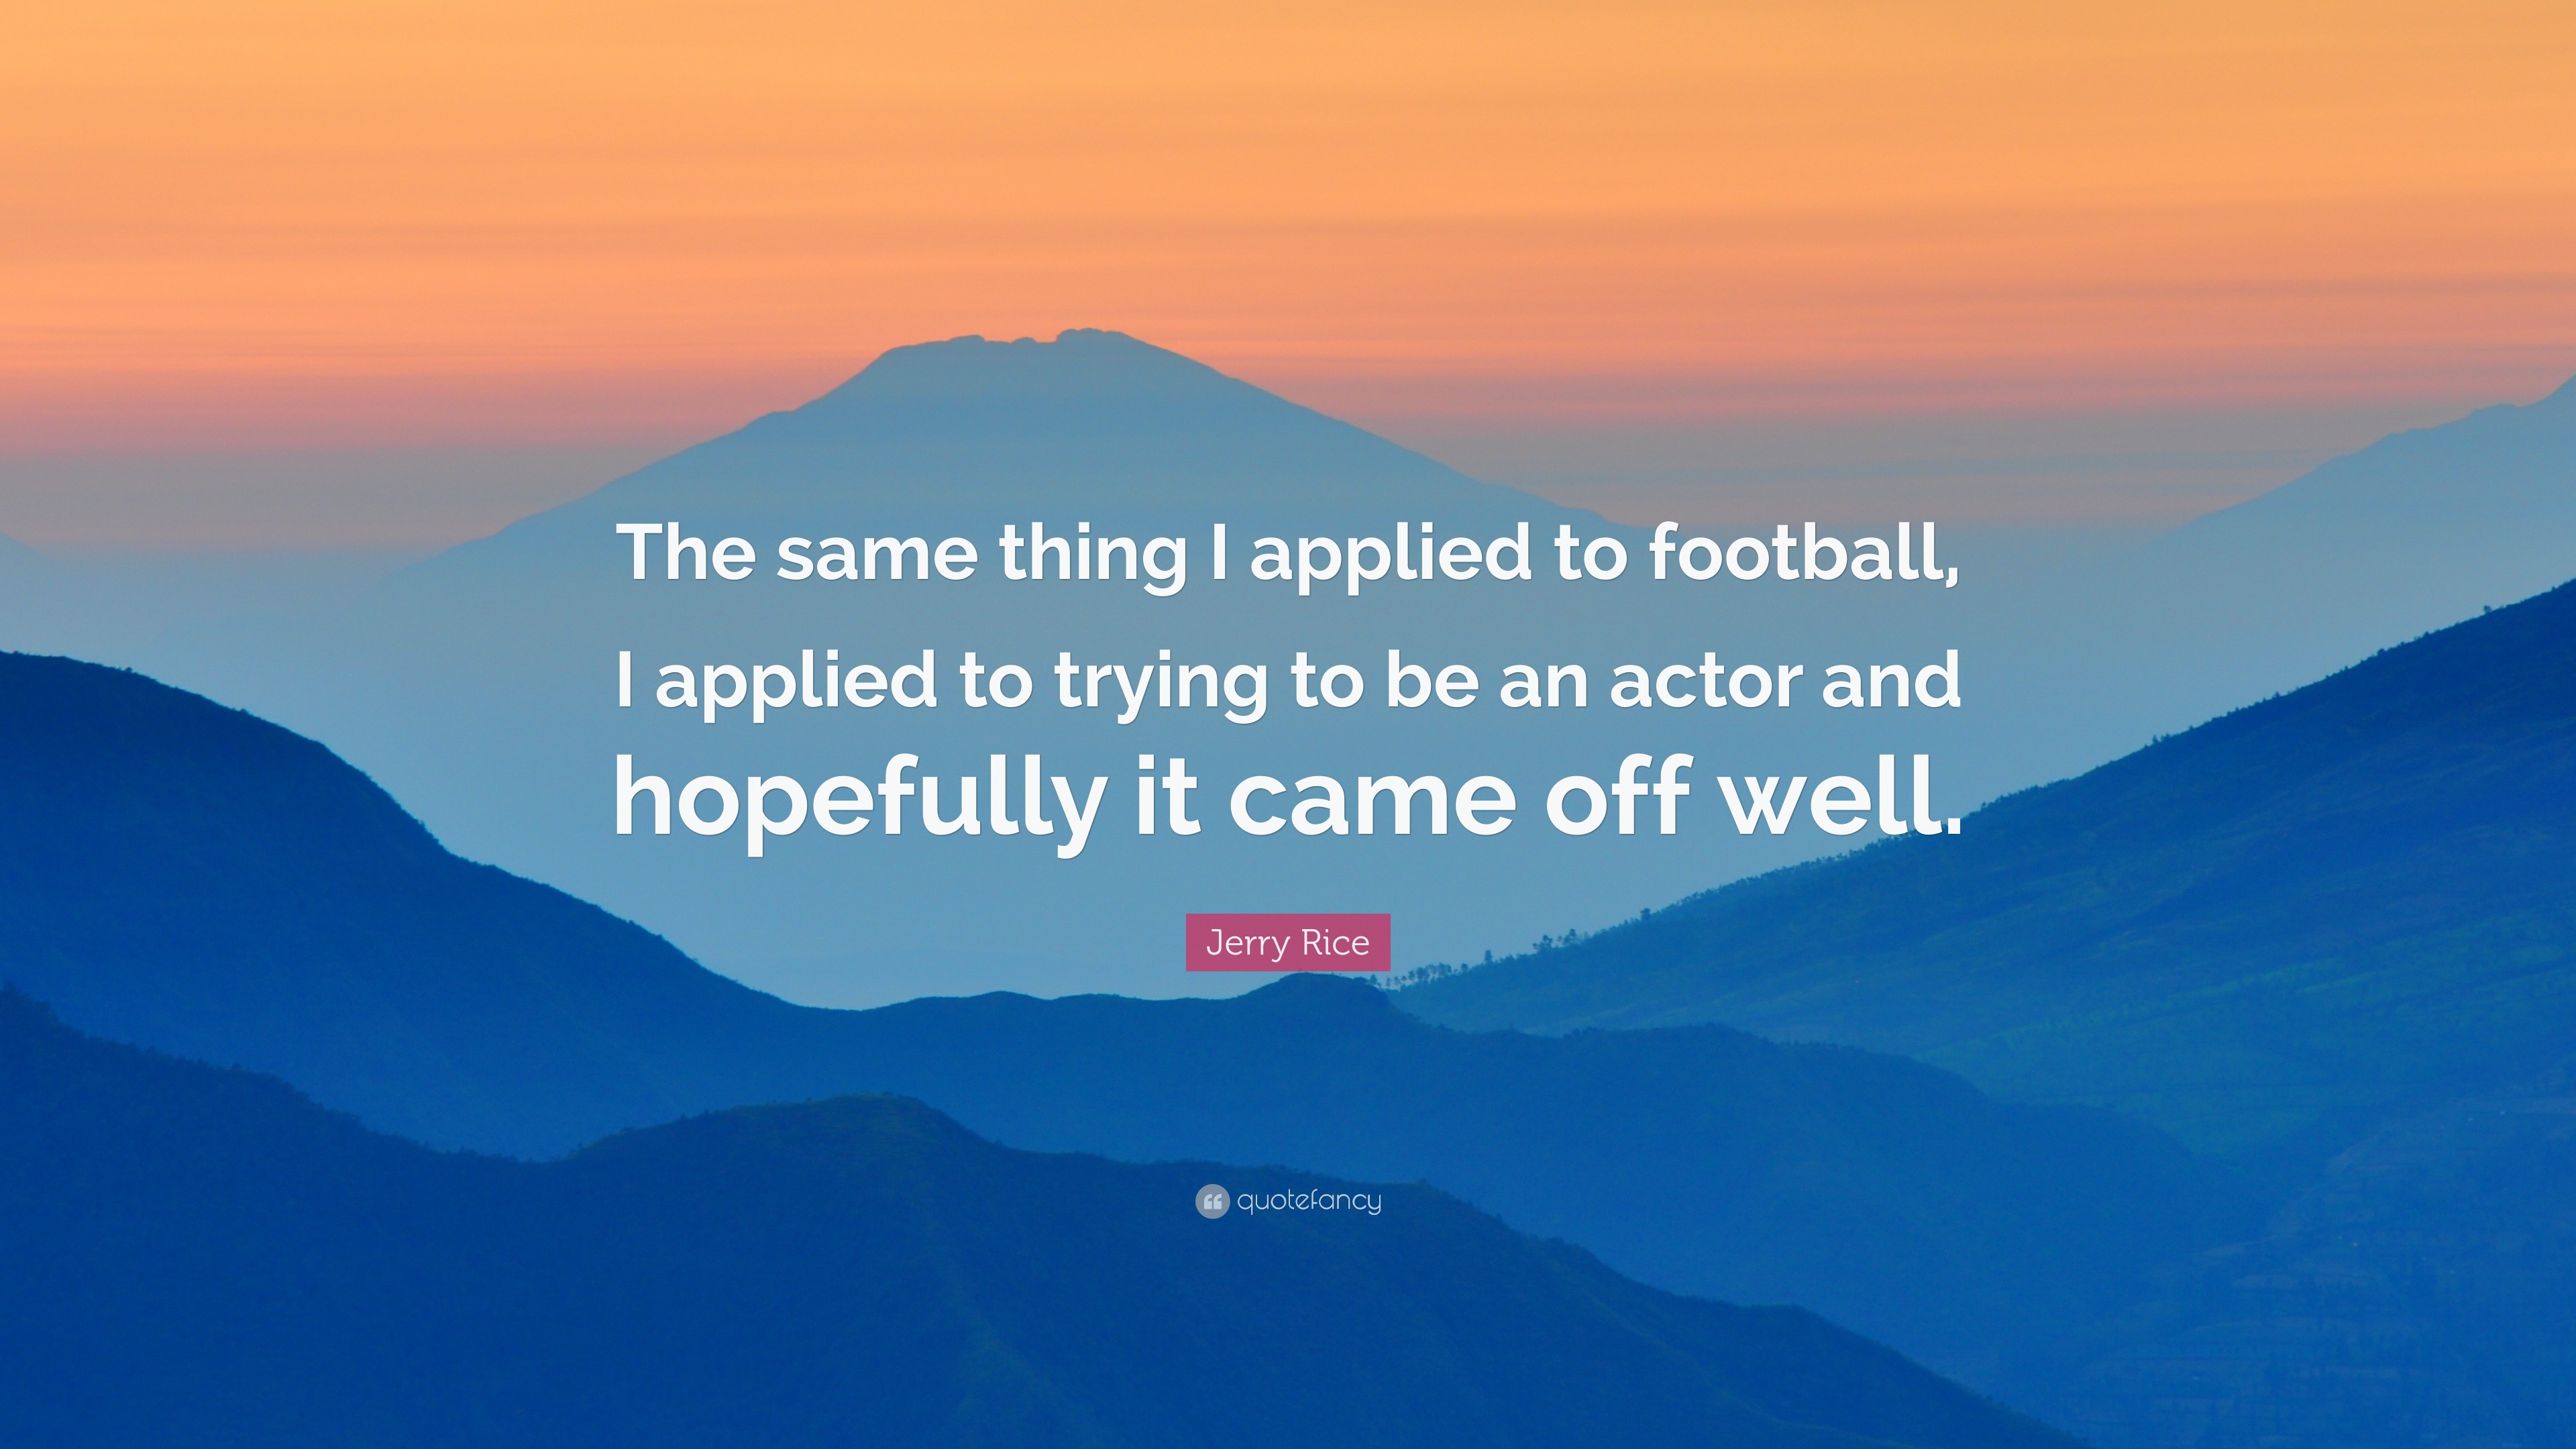 3840x2160 Jerry Rice Quote: “The same thing I applied to football, I applied to